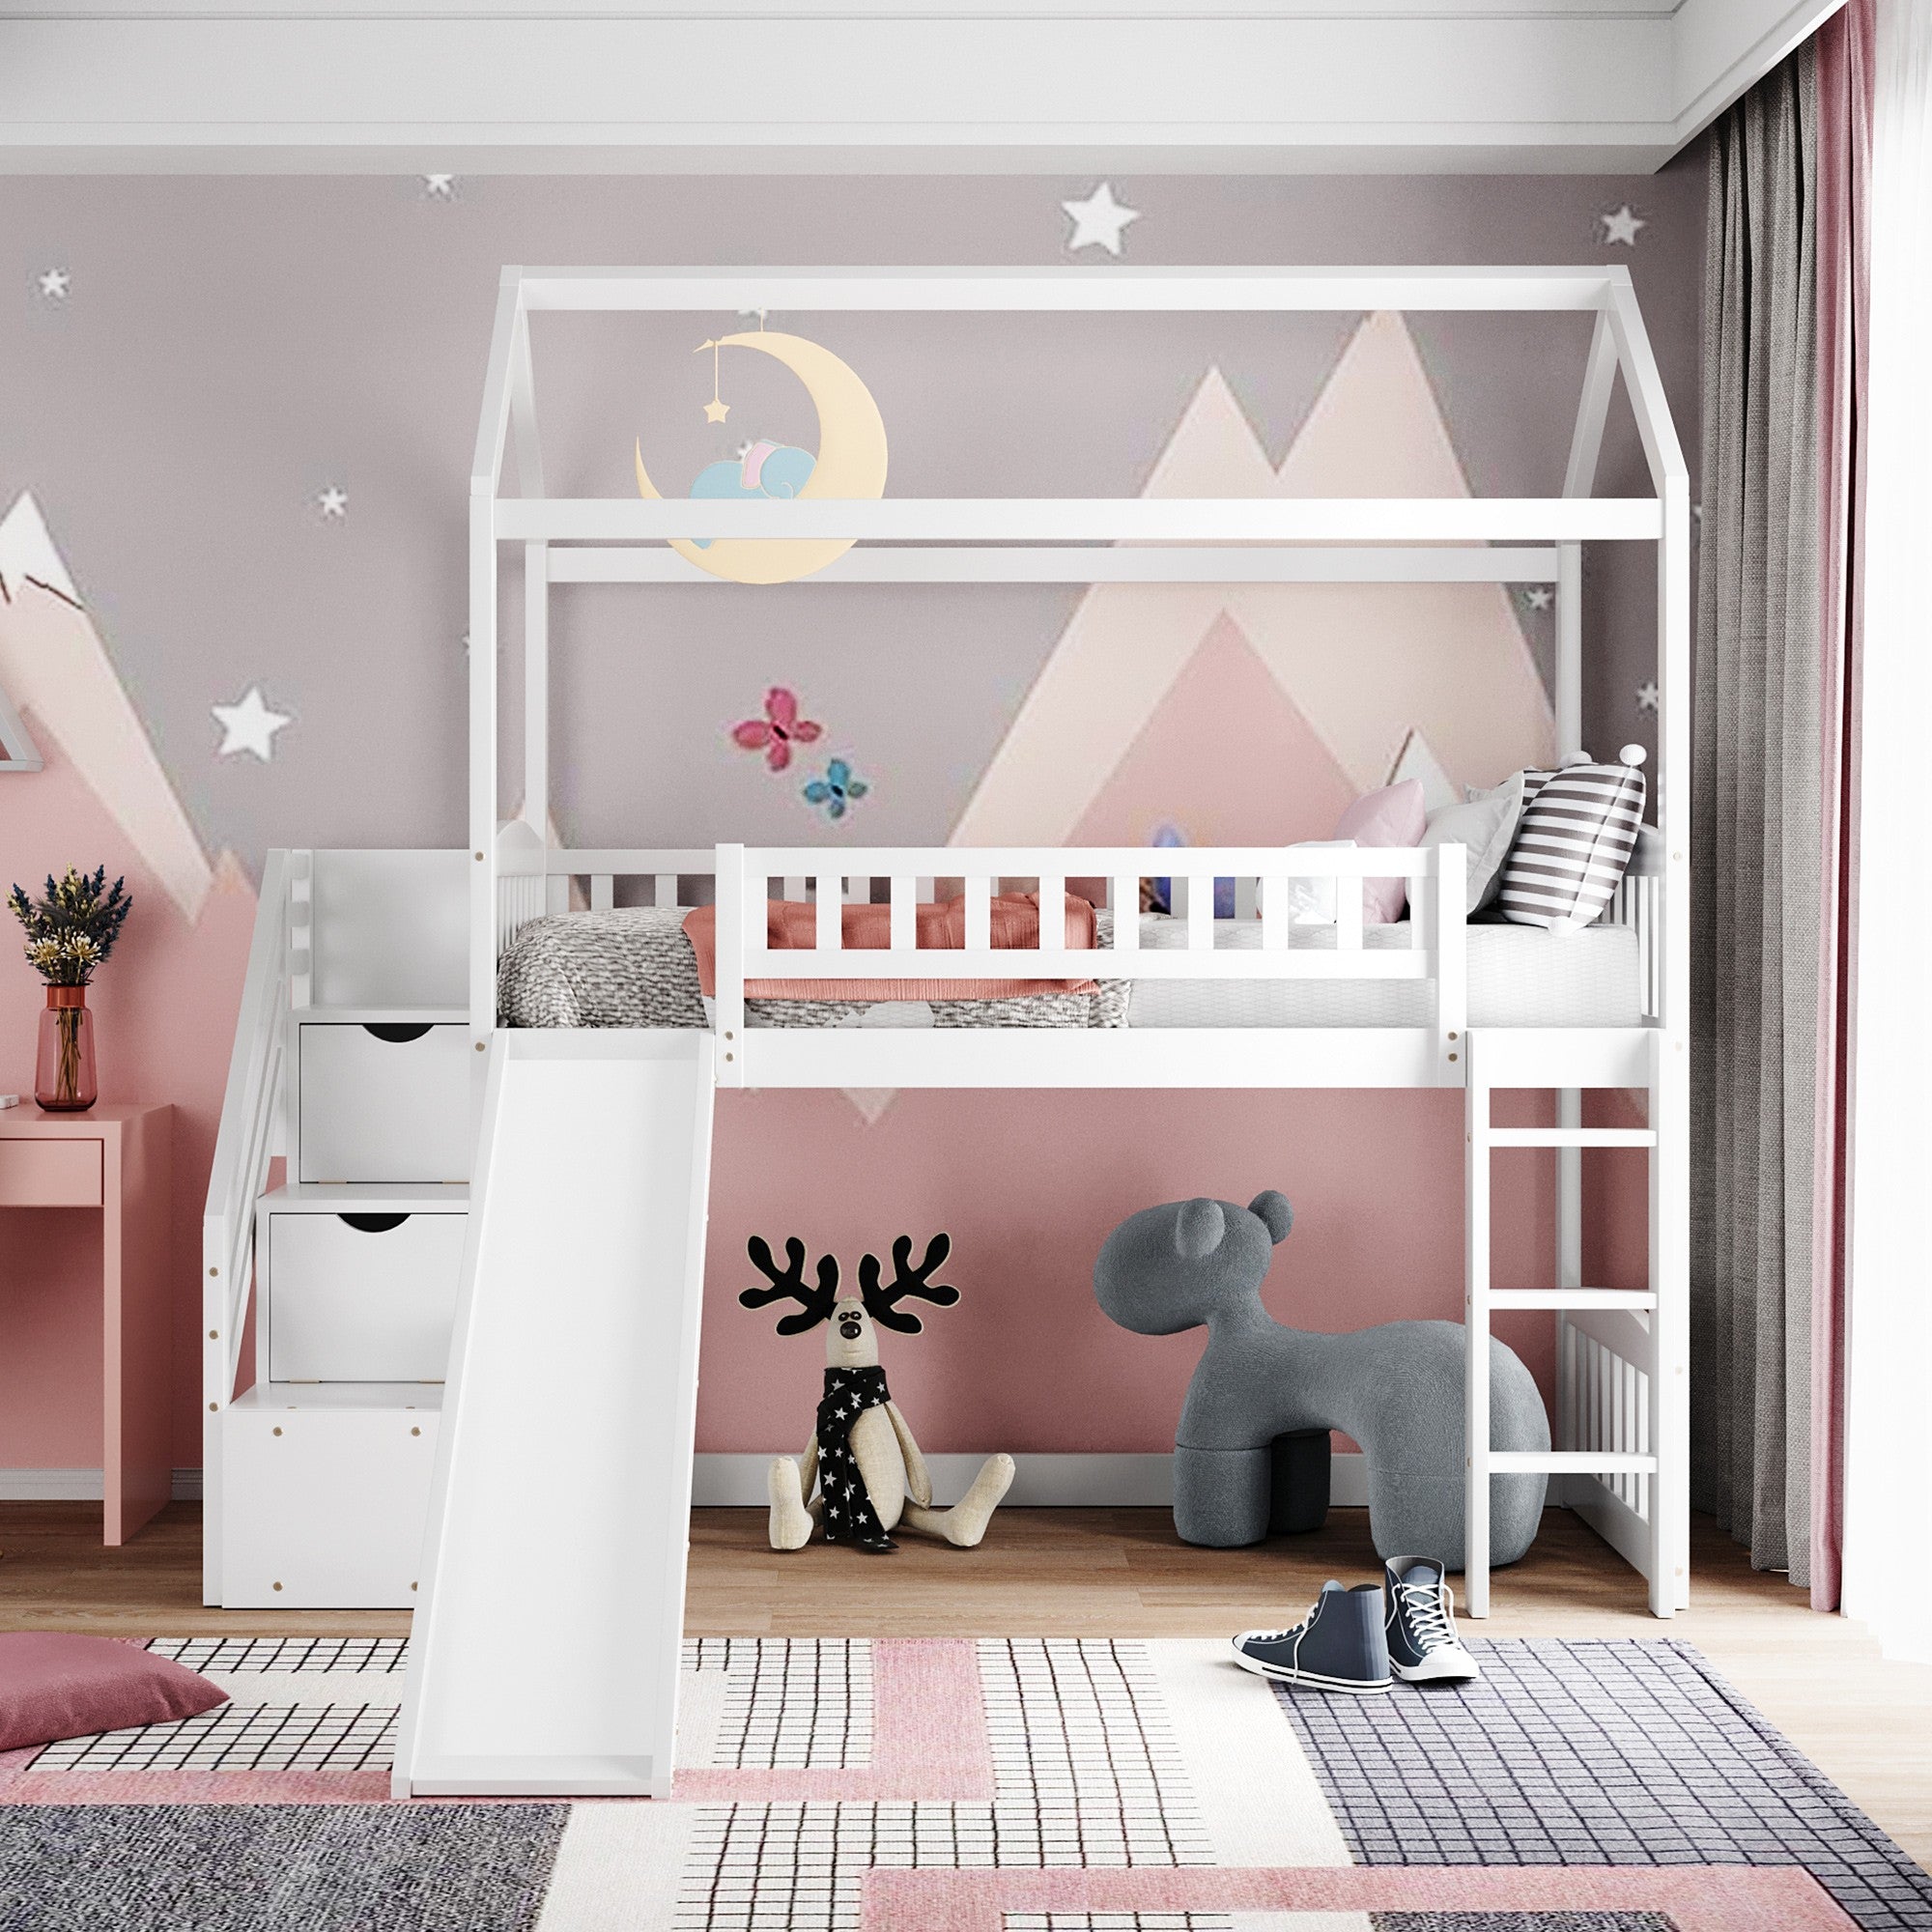 White Twin Size Playhouse Loft Bed With Drawers and Slide Default Title